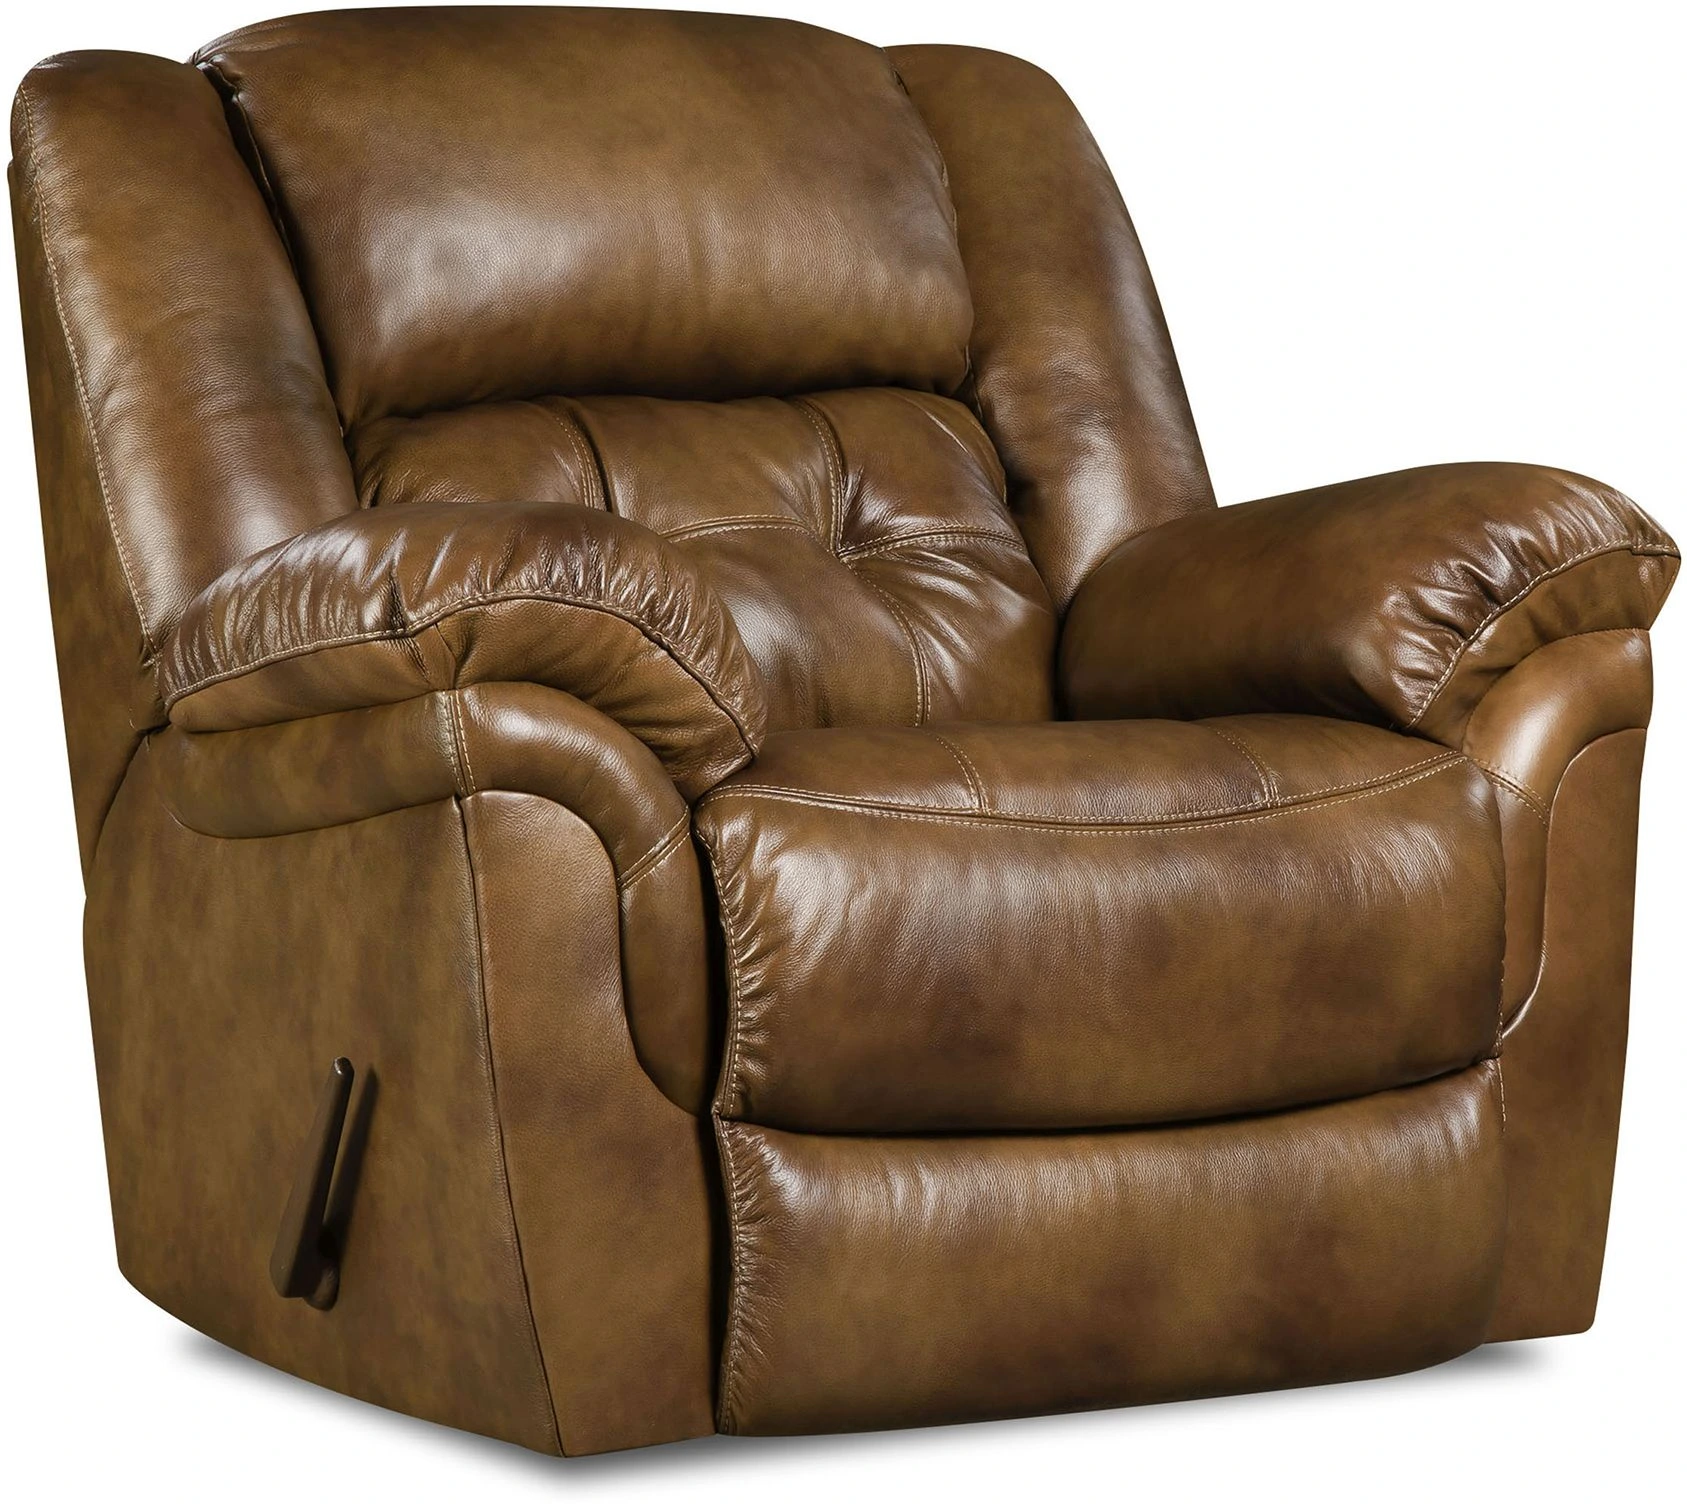 Side view of the HomeStretch Chaps collection power rocker recliner 